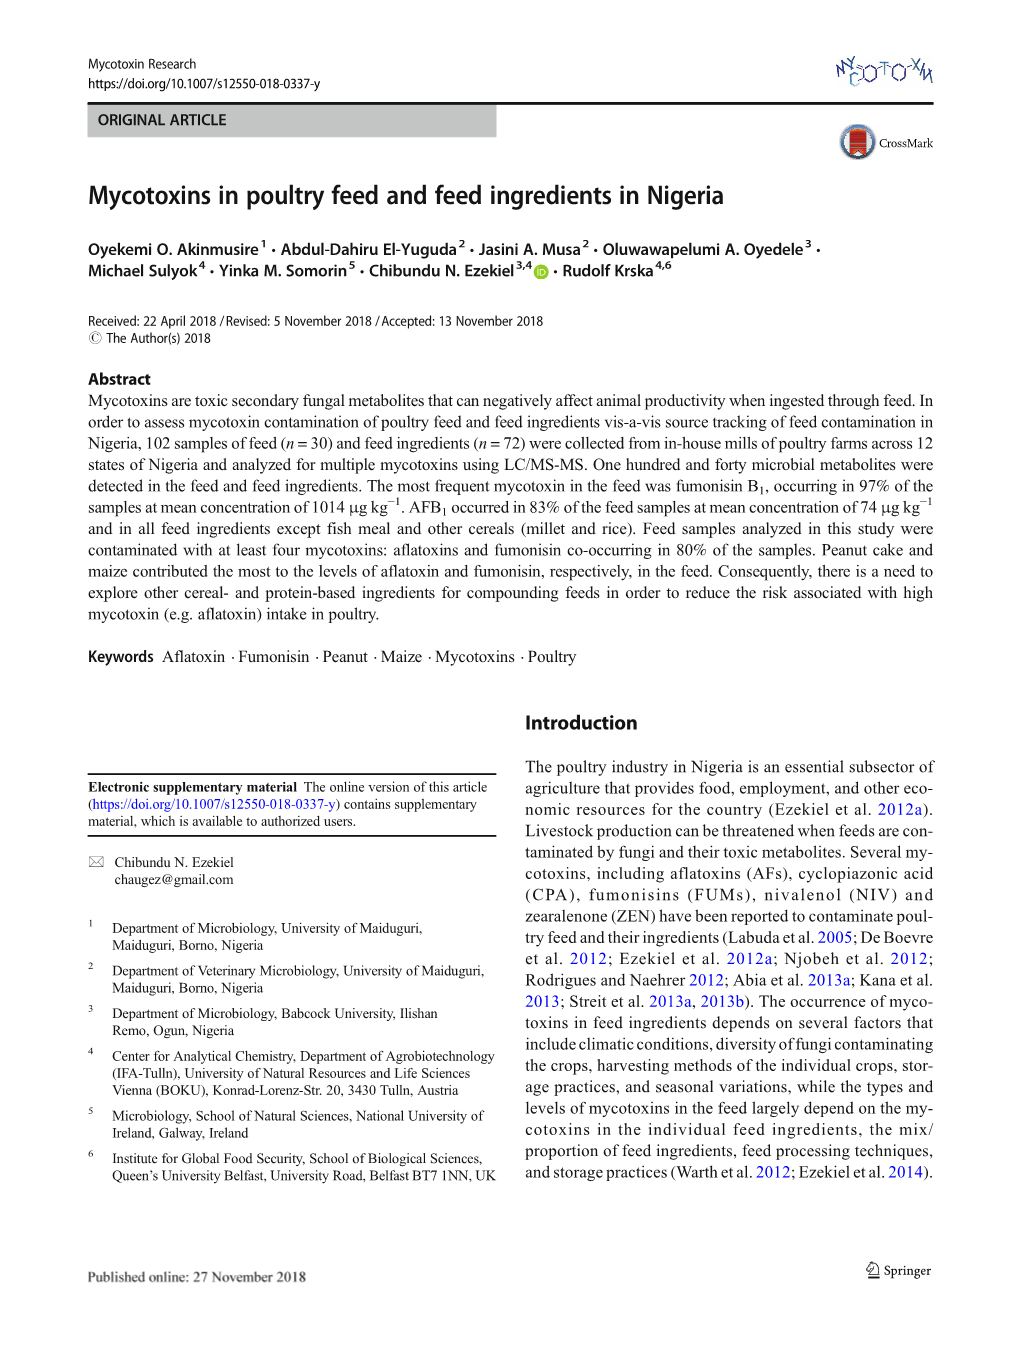 Mycotoxins in Poultry Feed and Feed Ingredients in Nigeria